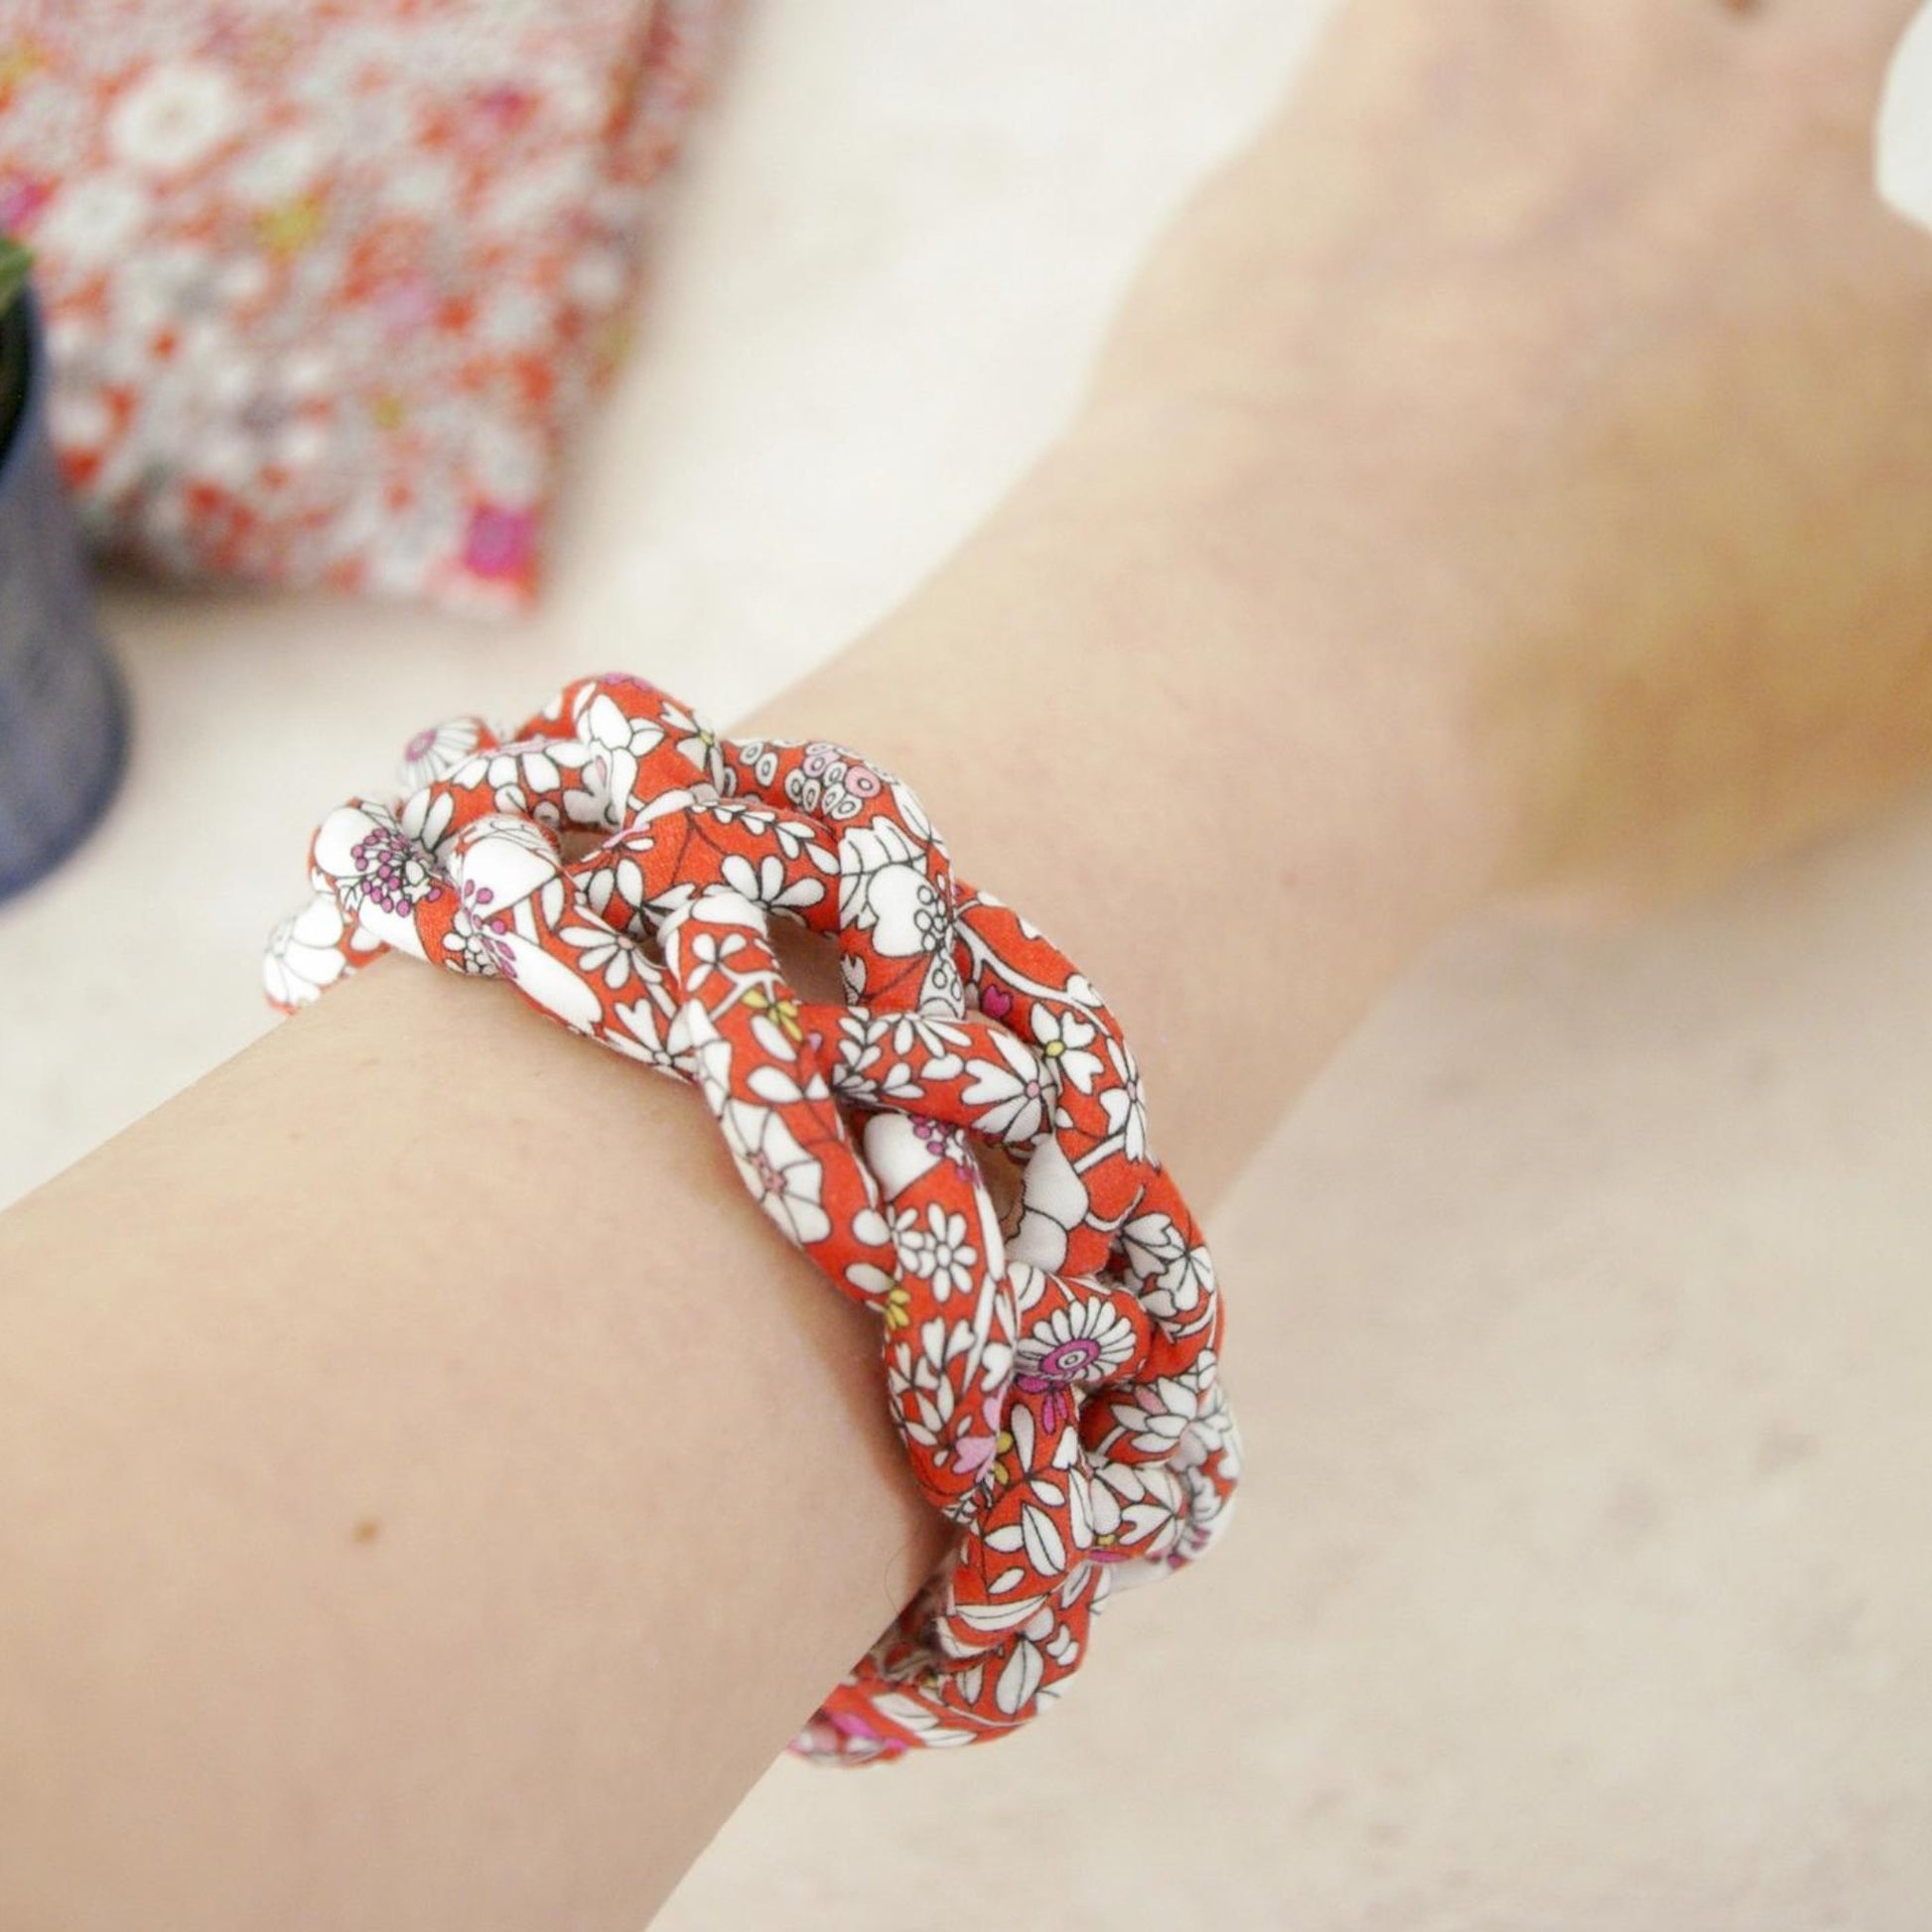 Braided Bangle - June's Meadow - The Little Jewellery Company